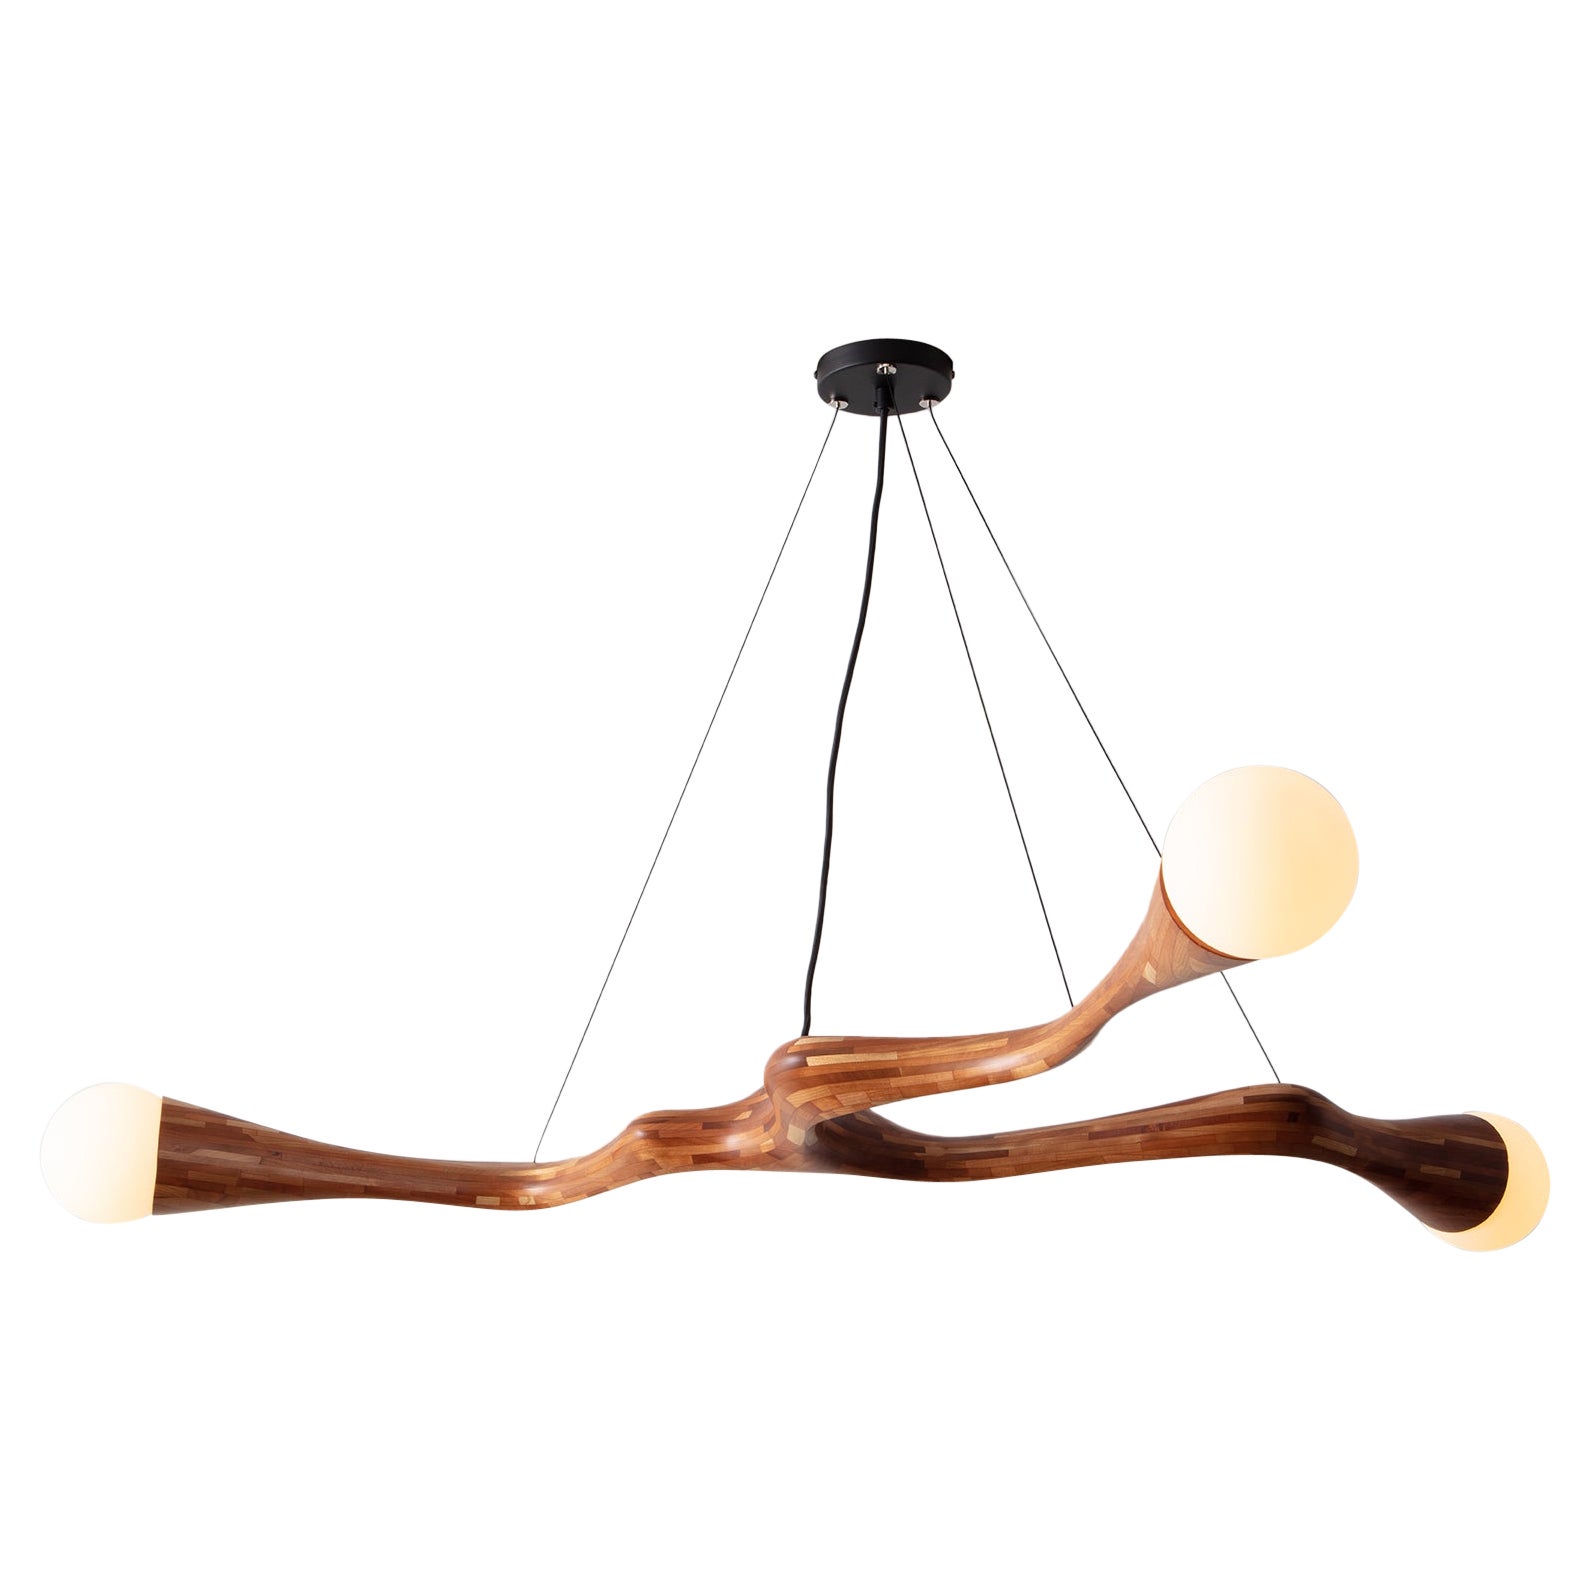 Customizable STACKED Wooden Multi-Bulb Chandelier, example shown in Cherry